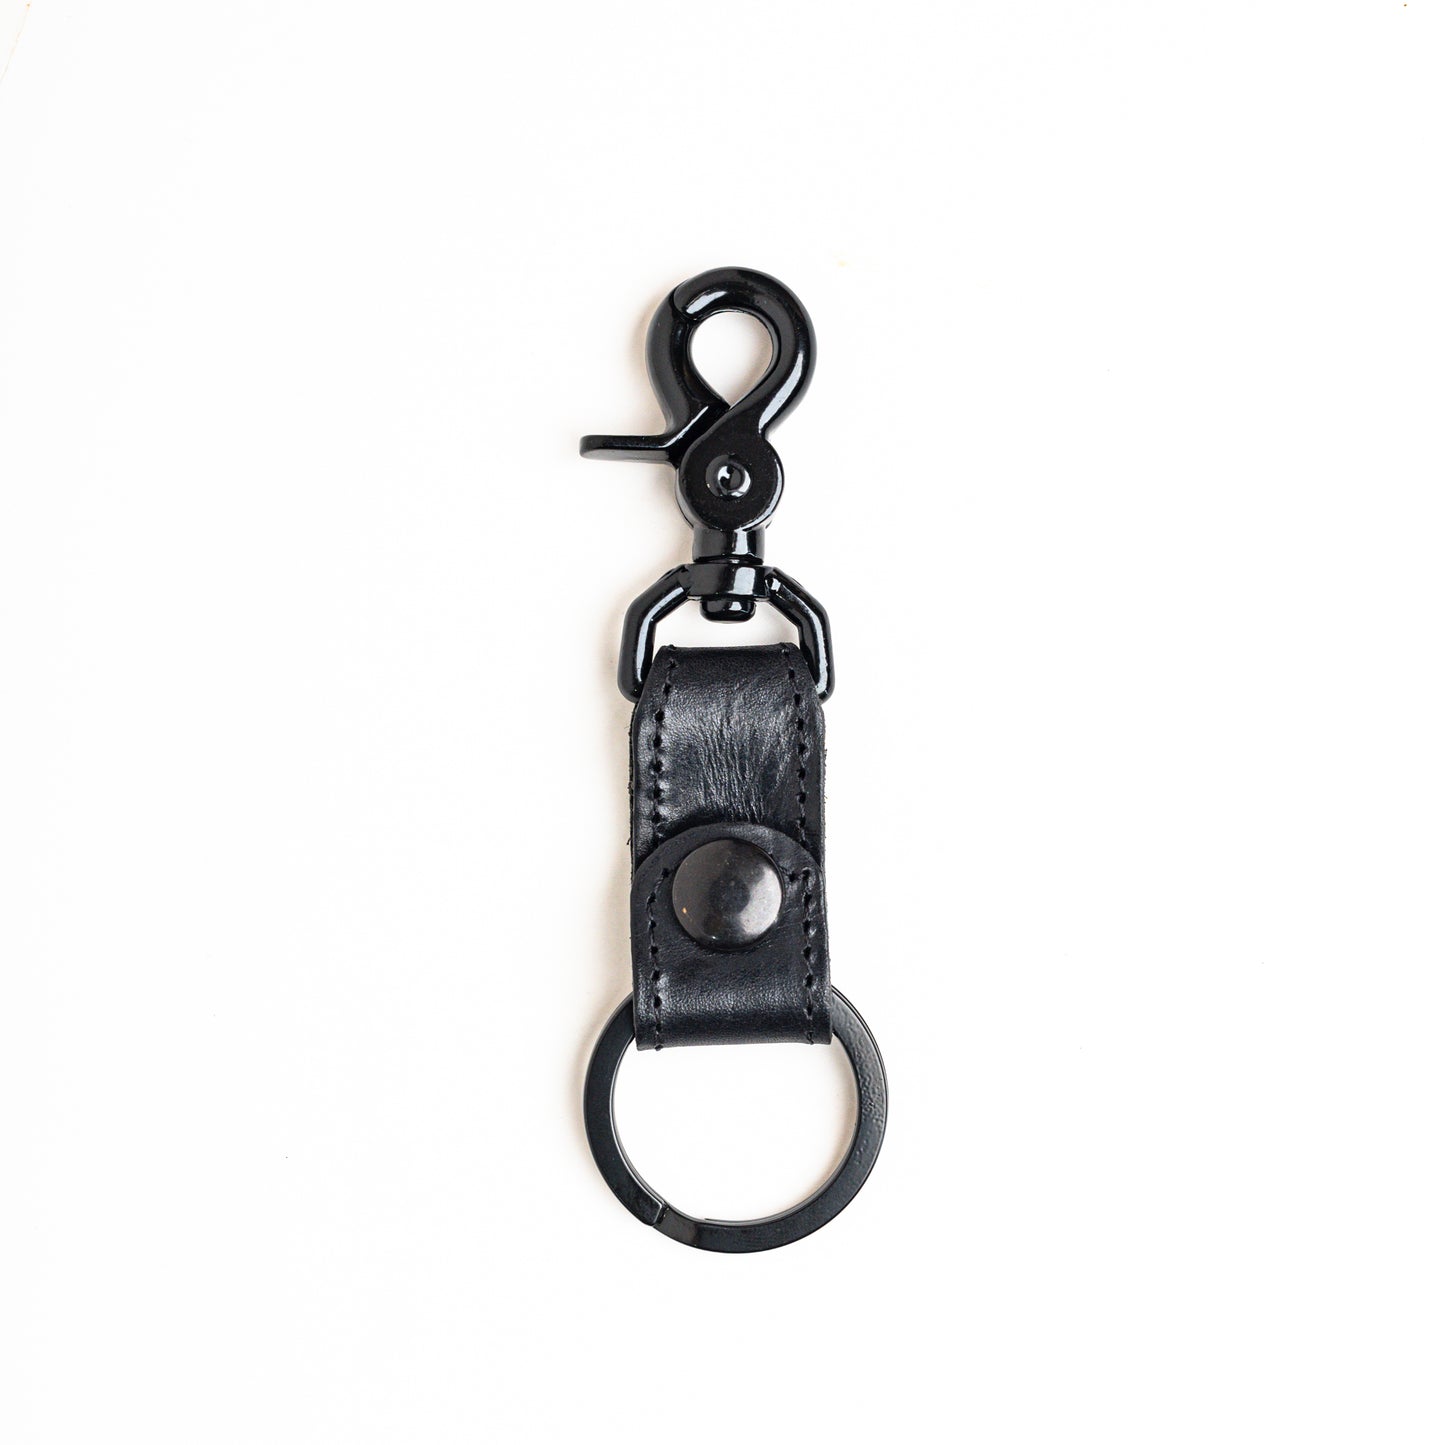 Leather Loop Hanging key chain Made in U.S.A